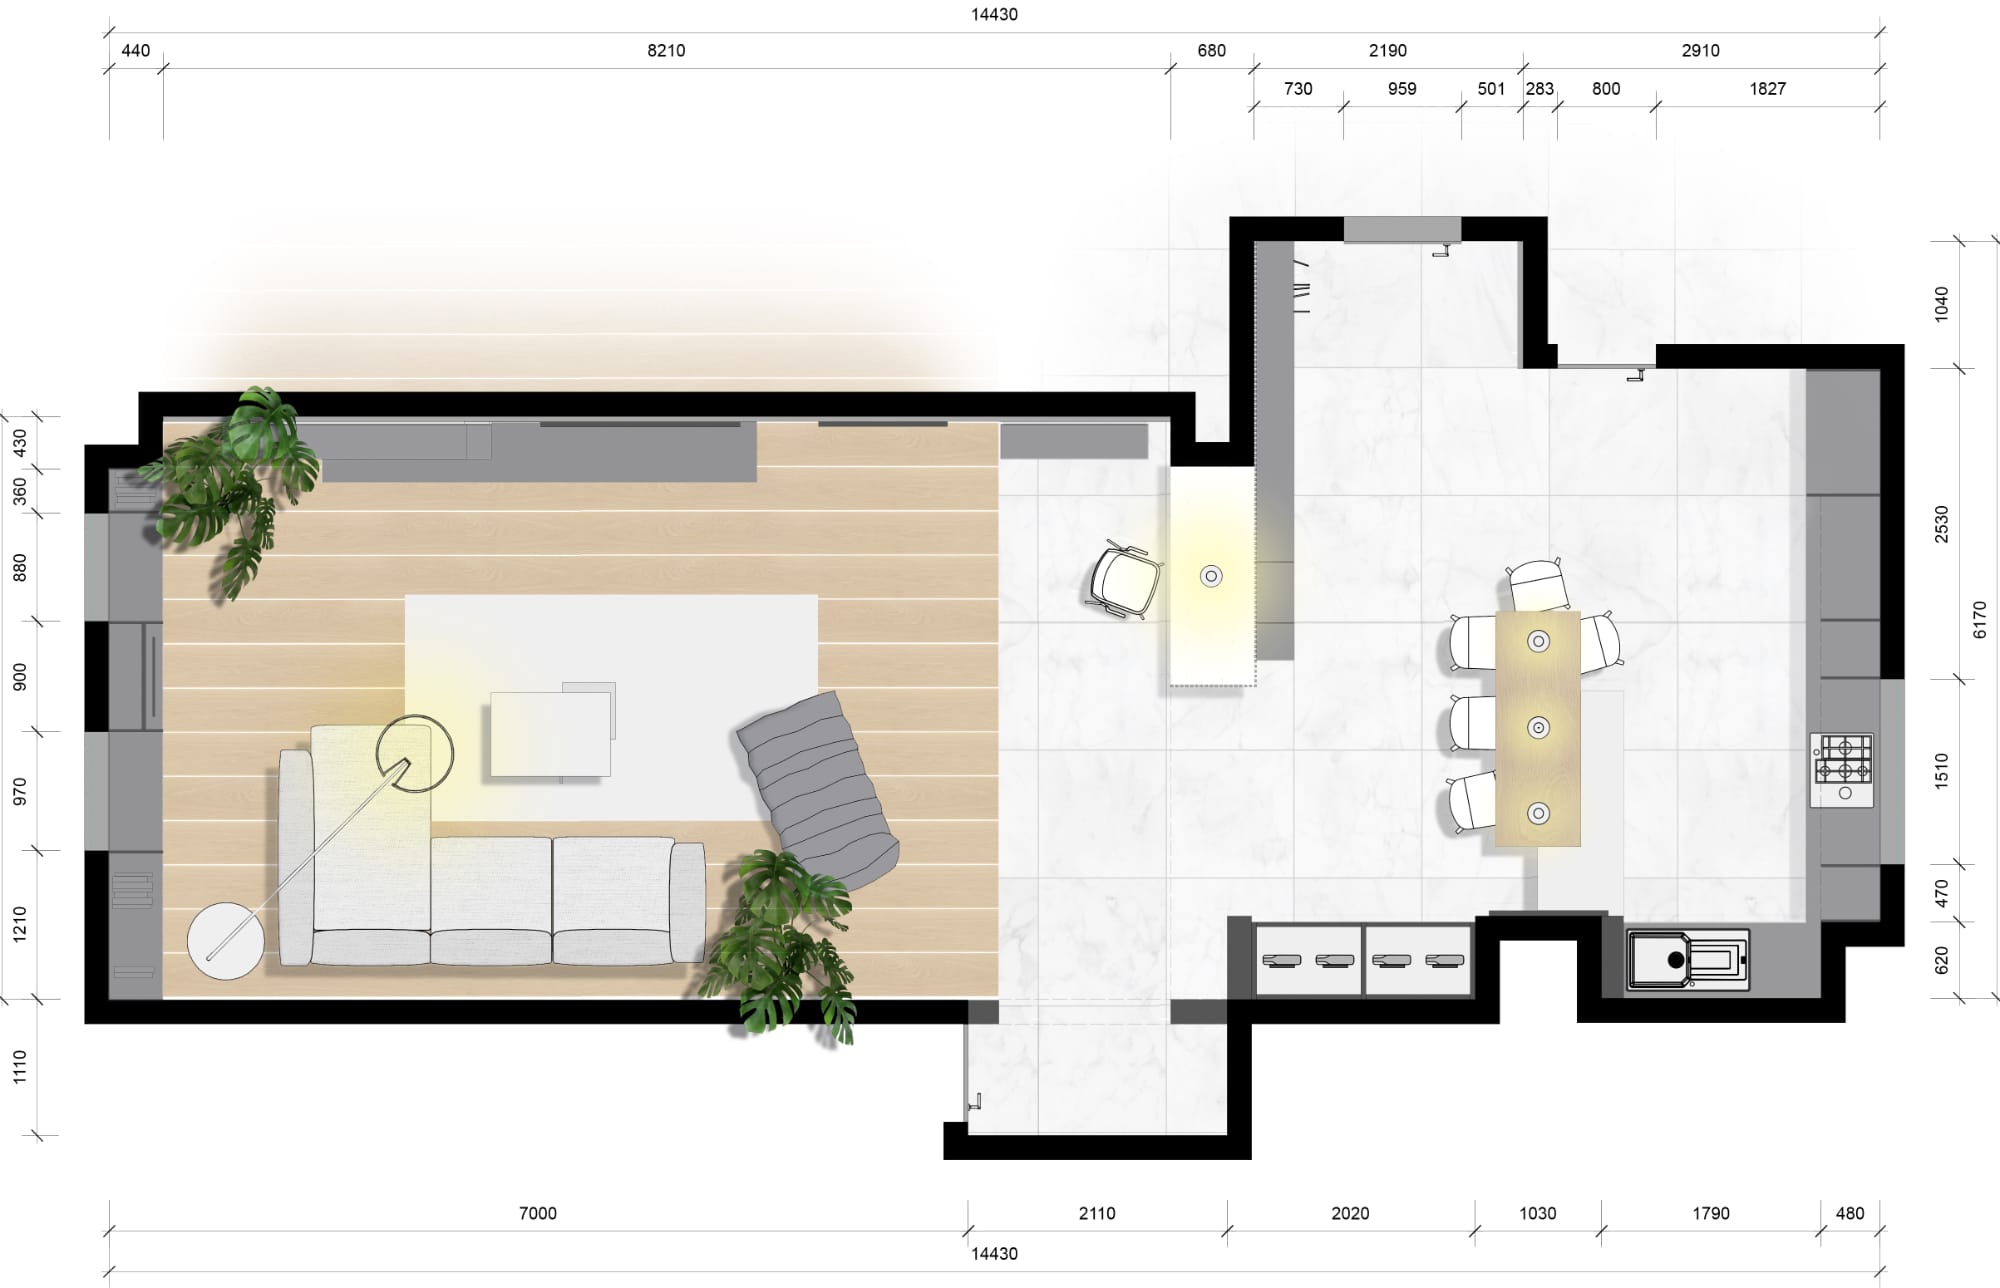 Technical drawing of furnished Apartment R1 with dimensions